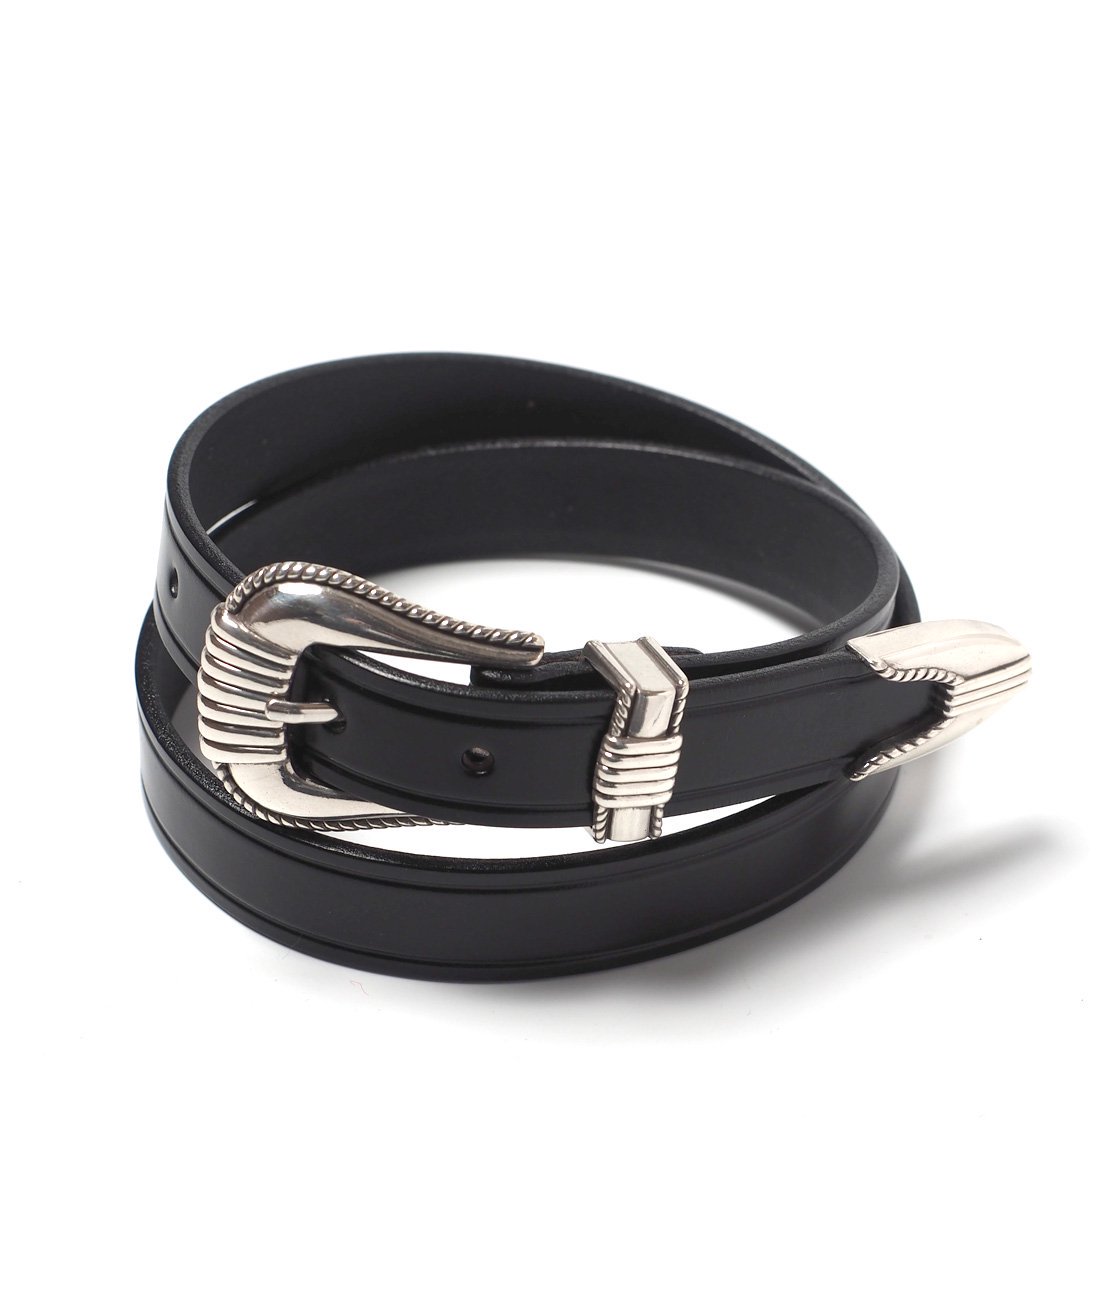 TORY LEATHER】3PIECE CREASED SILVER BUCKLE BELT - BLACK ベルト 